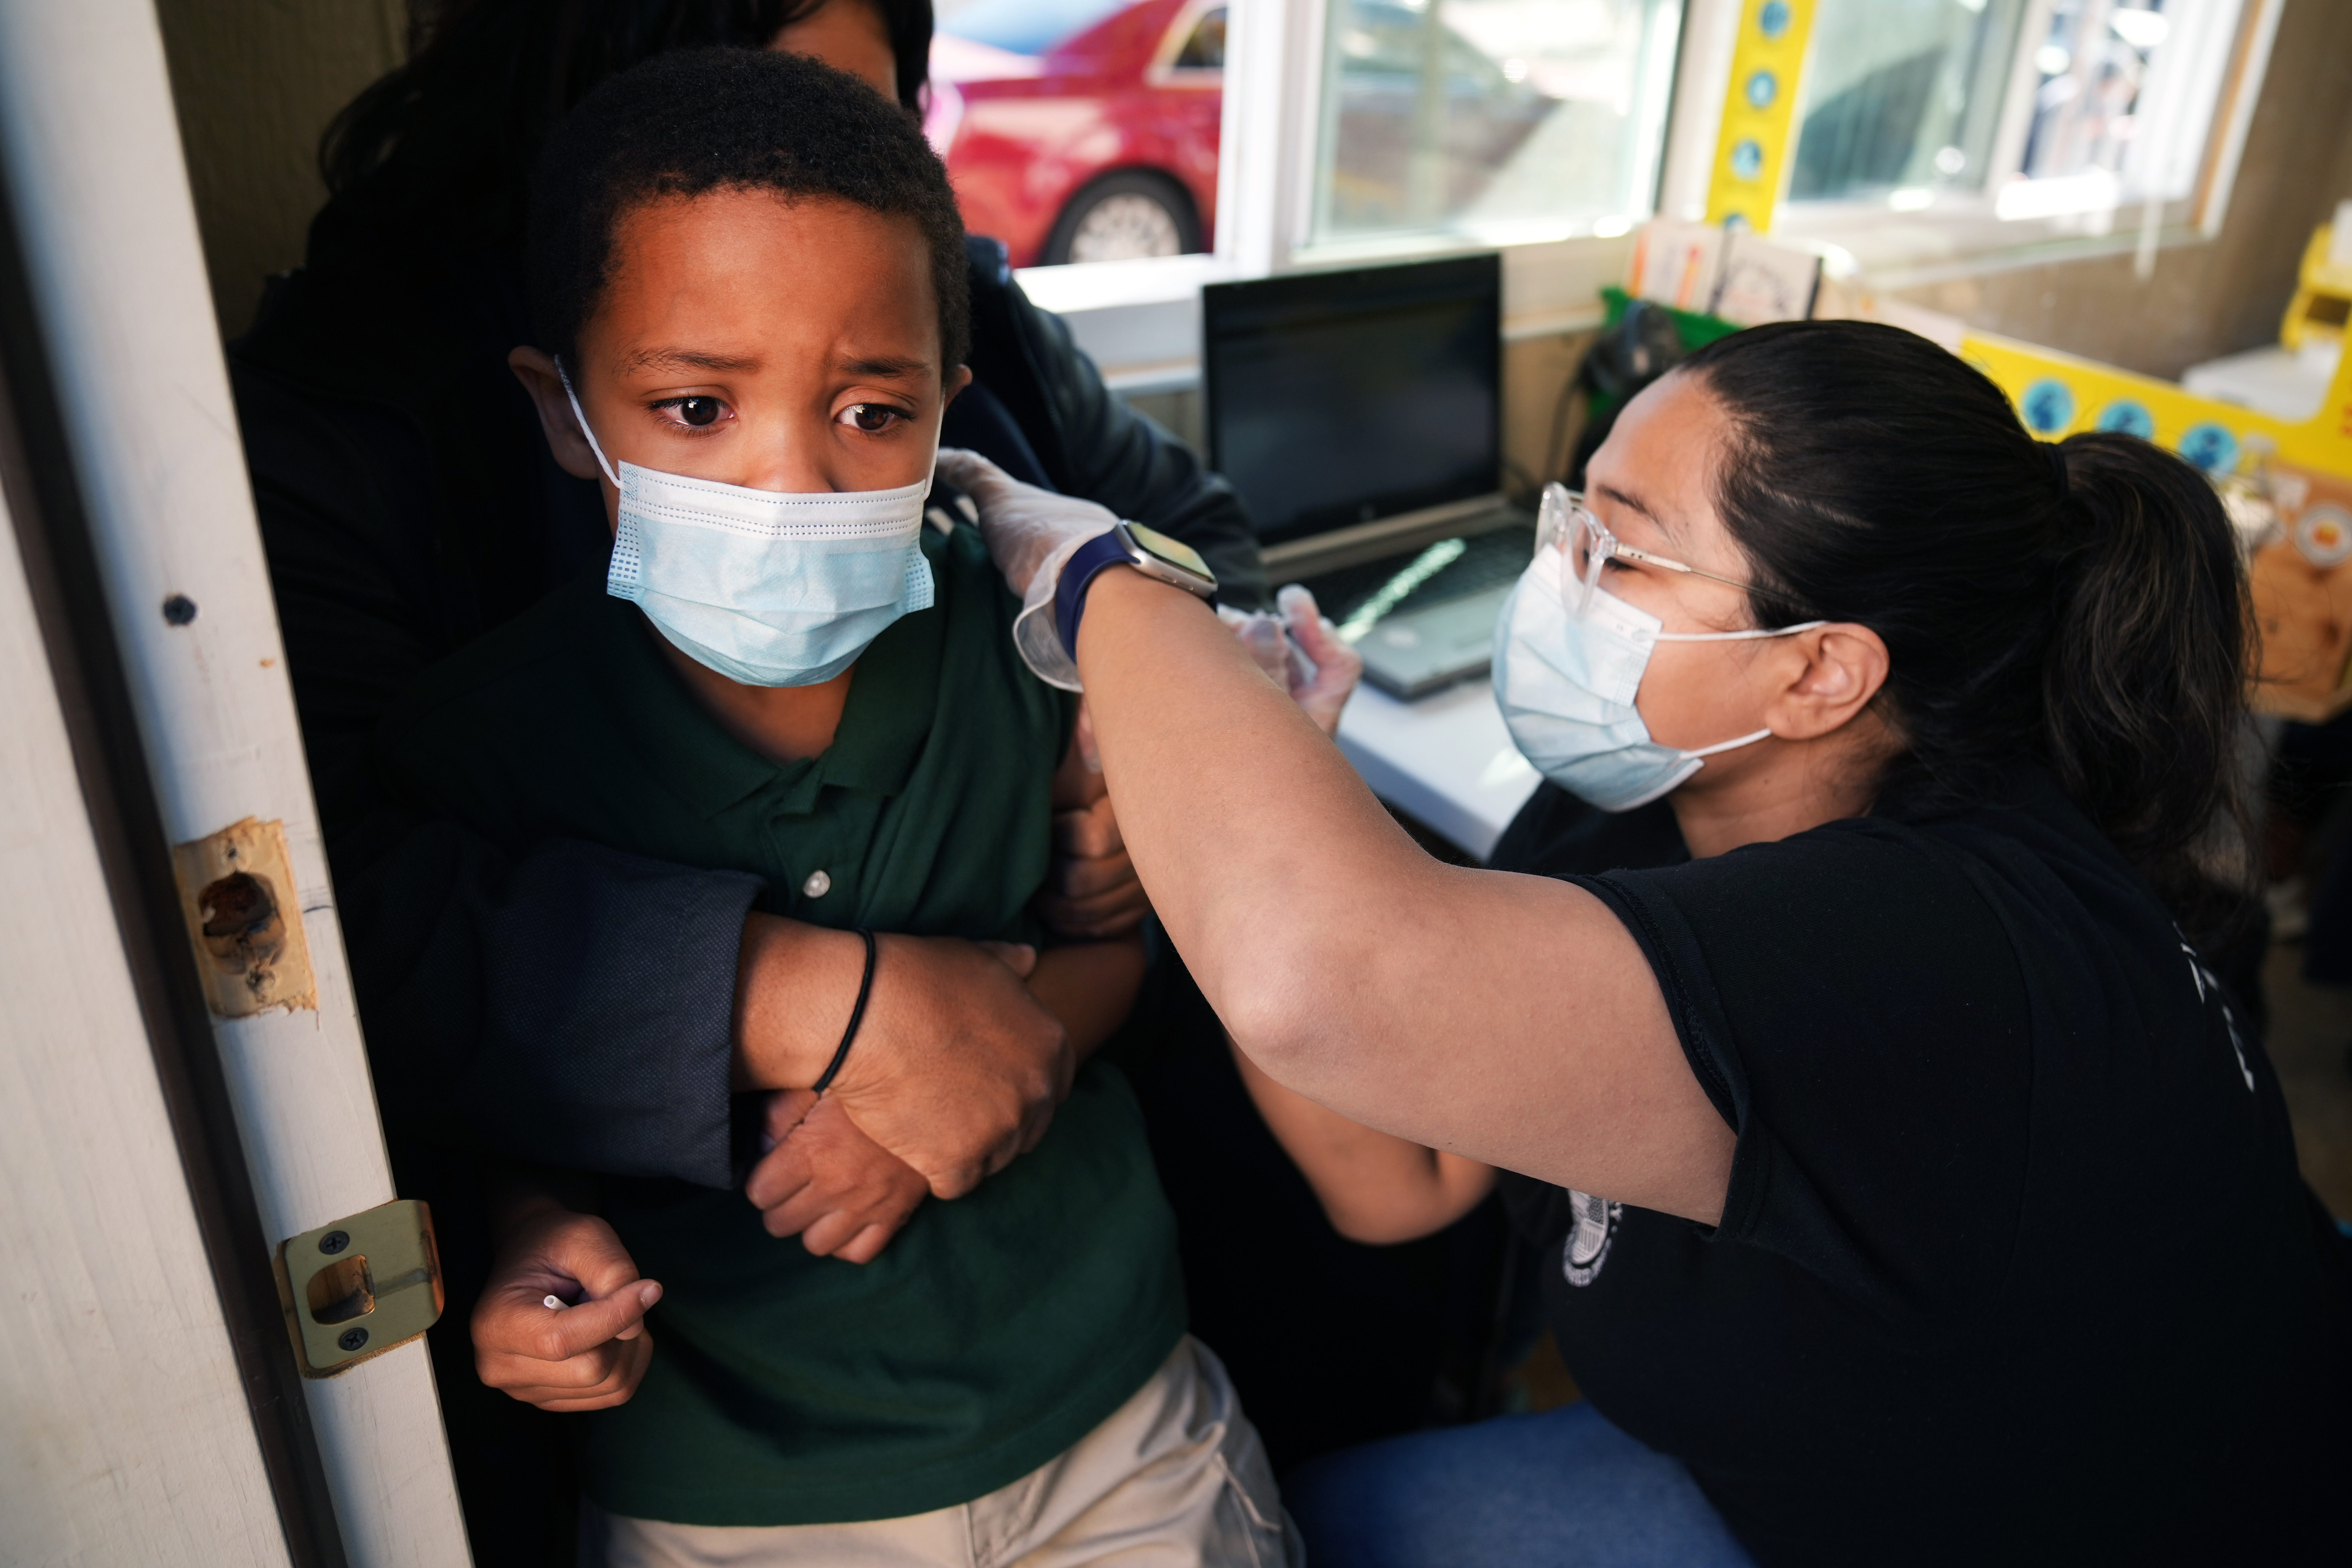 A health care professional wearing glasses and a white protective mask gives a dose of COVID vaccine to a young boy, who is being held by a parent.